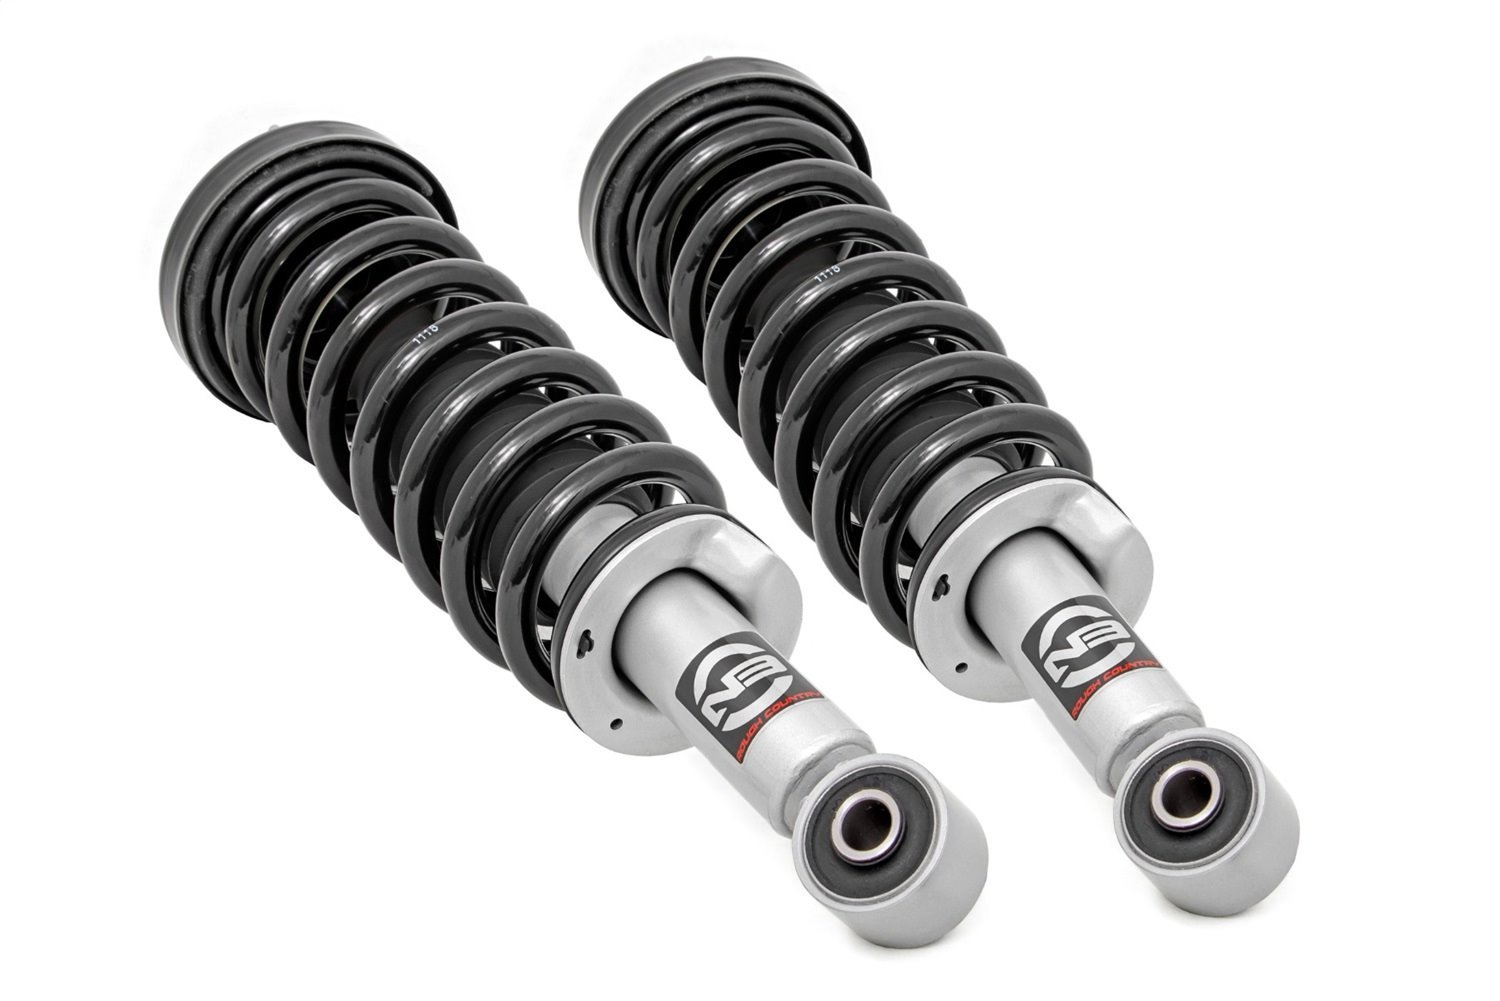 501013 Loaded Strut Pair, 2.5 in., Toyota 4Runner 2WD/4WD (1996-2002)